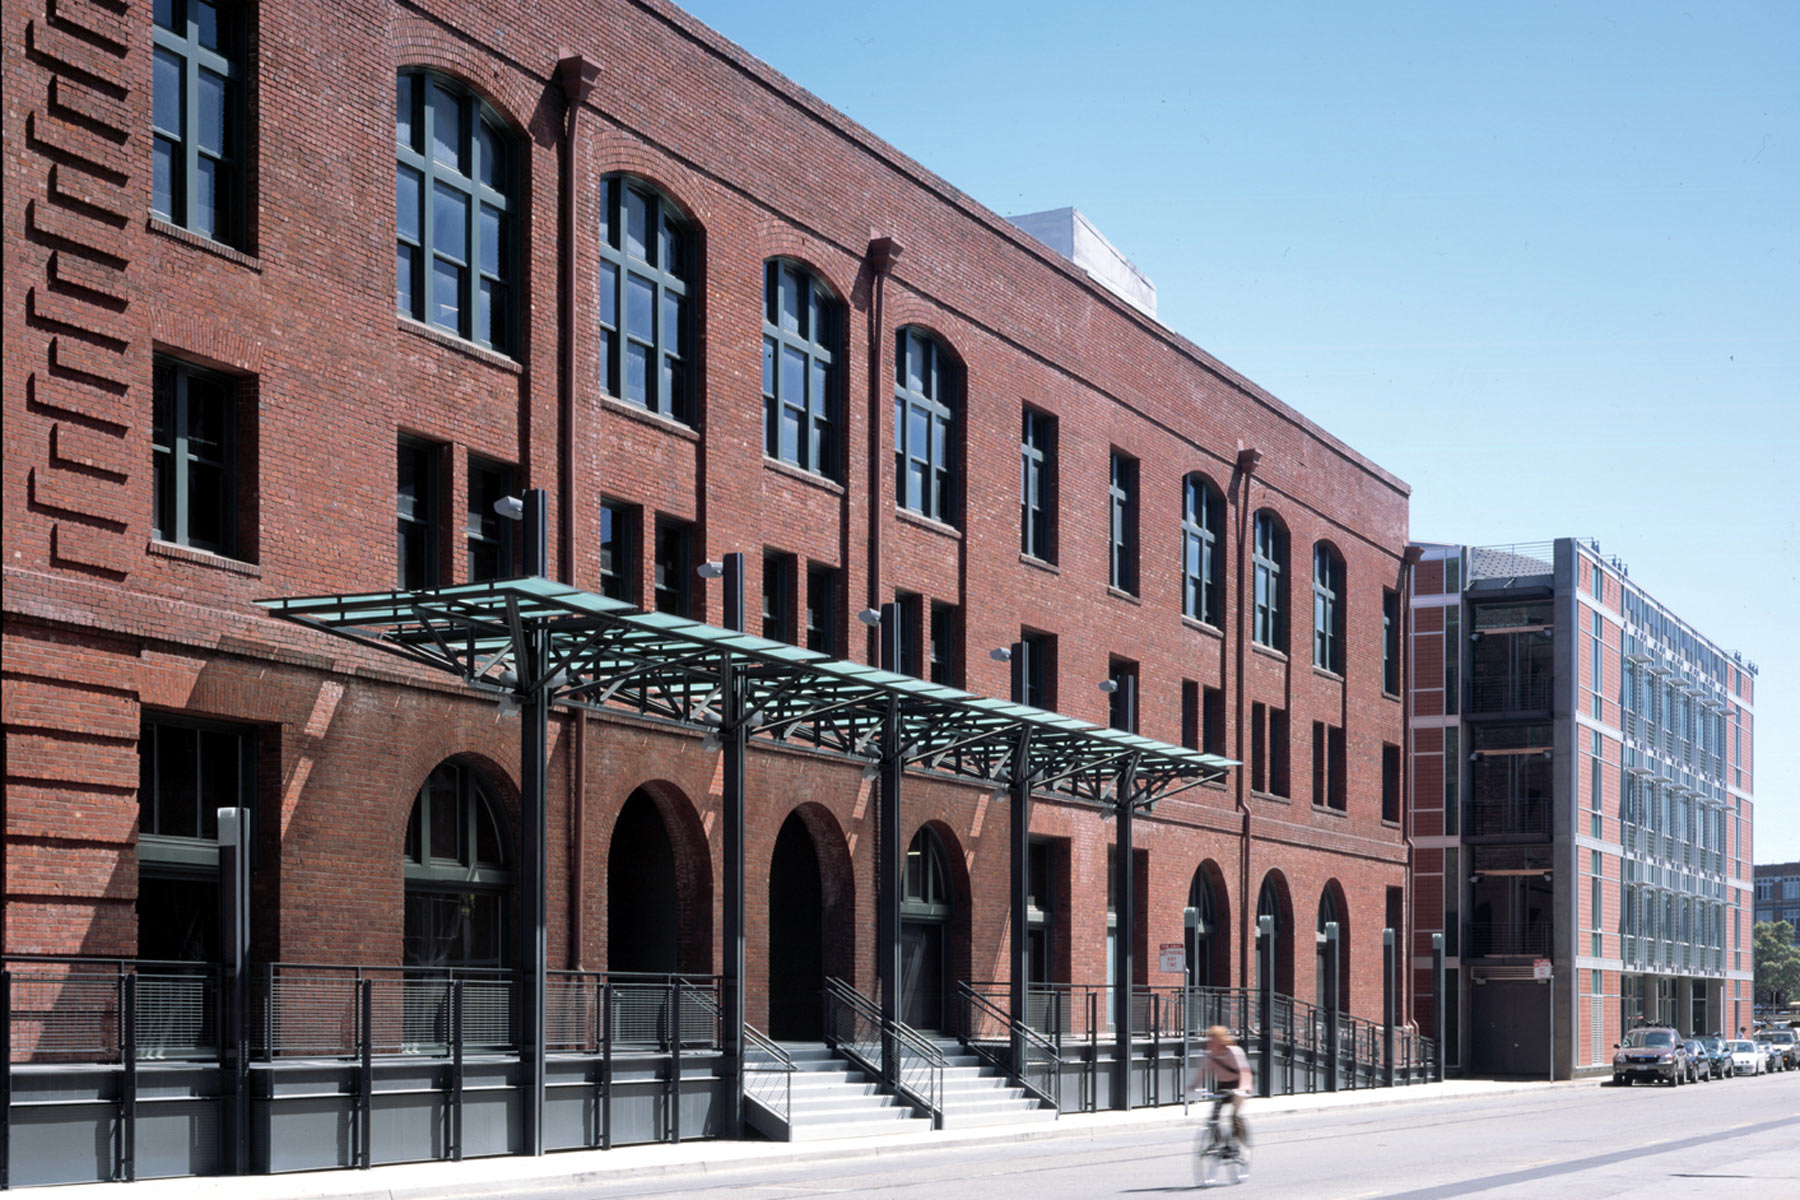 The historic Baker and Hamilton building in the South of Market neighborhood in San Francisco was renovated to include modern office workspaces, along with the addition to the new office building at 625 Townsend, creating a juxtaposition between the past and the present, and a contemporary reinterpretation of the warehouse district.